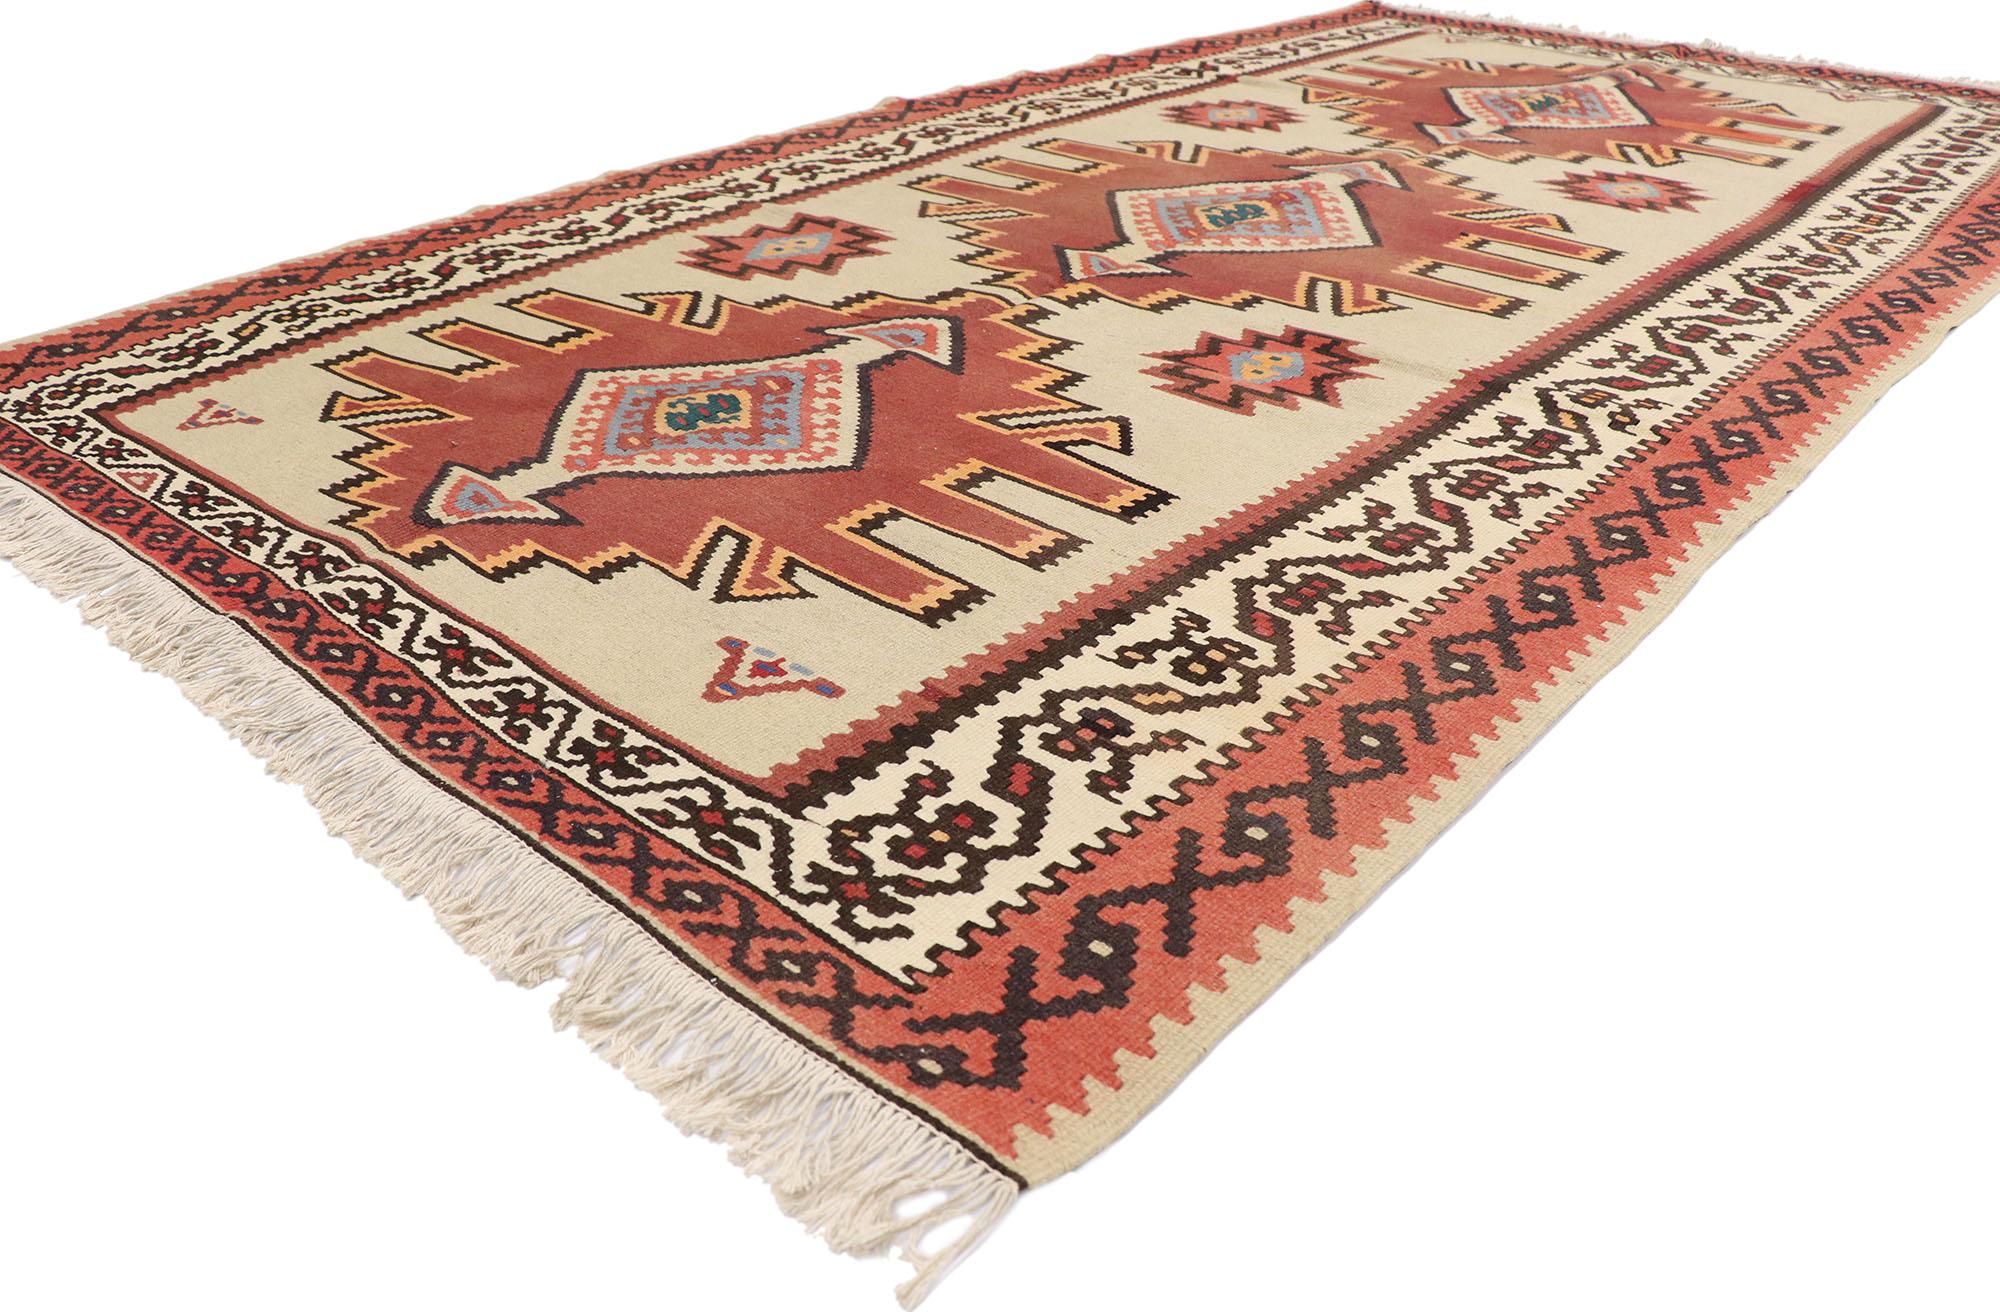 78005 vintage Turkish Kilim rug with Tribal style 05'05 x 09'10. Full of tiny details and a bold expressive design combined with with warm earthy color palette and tribal style, this hand-woven wool vintage Turkish kilim rug is a captivating vision